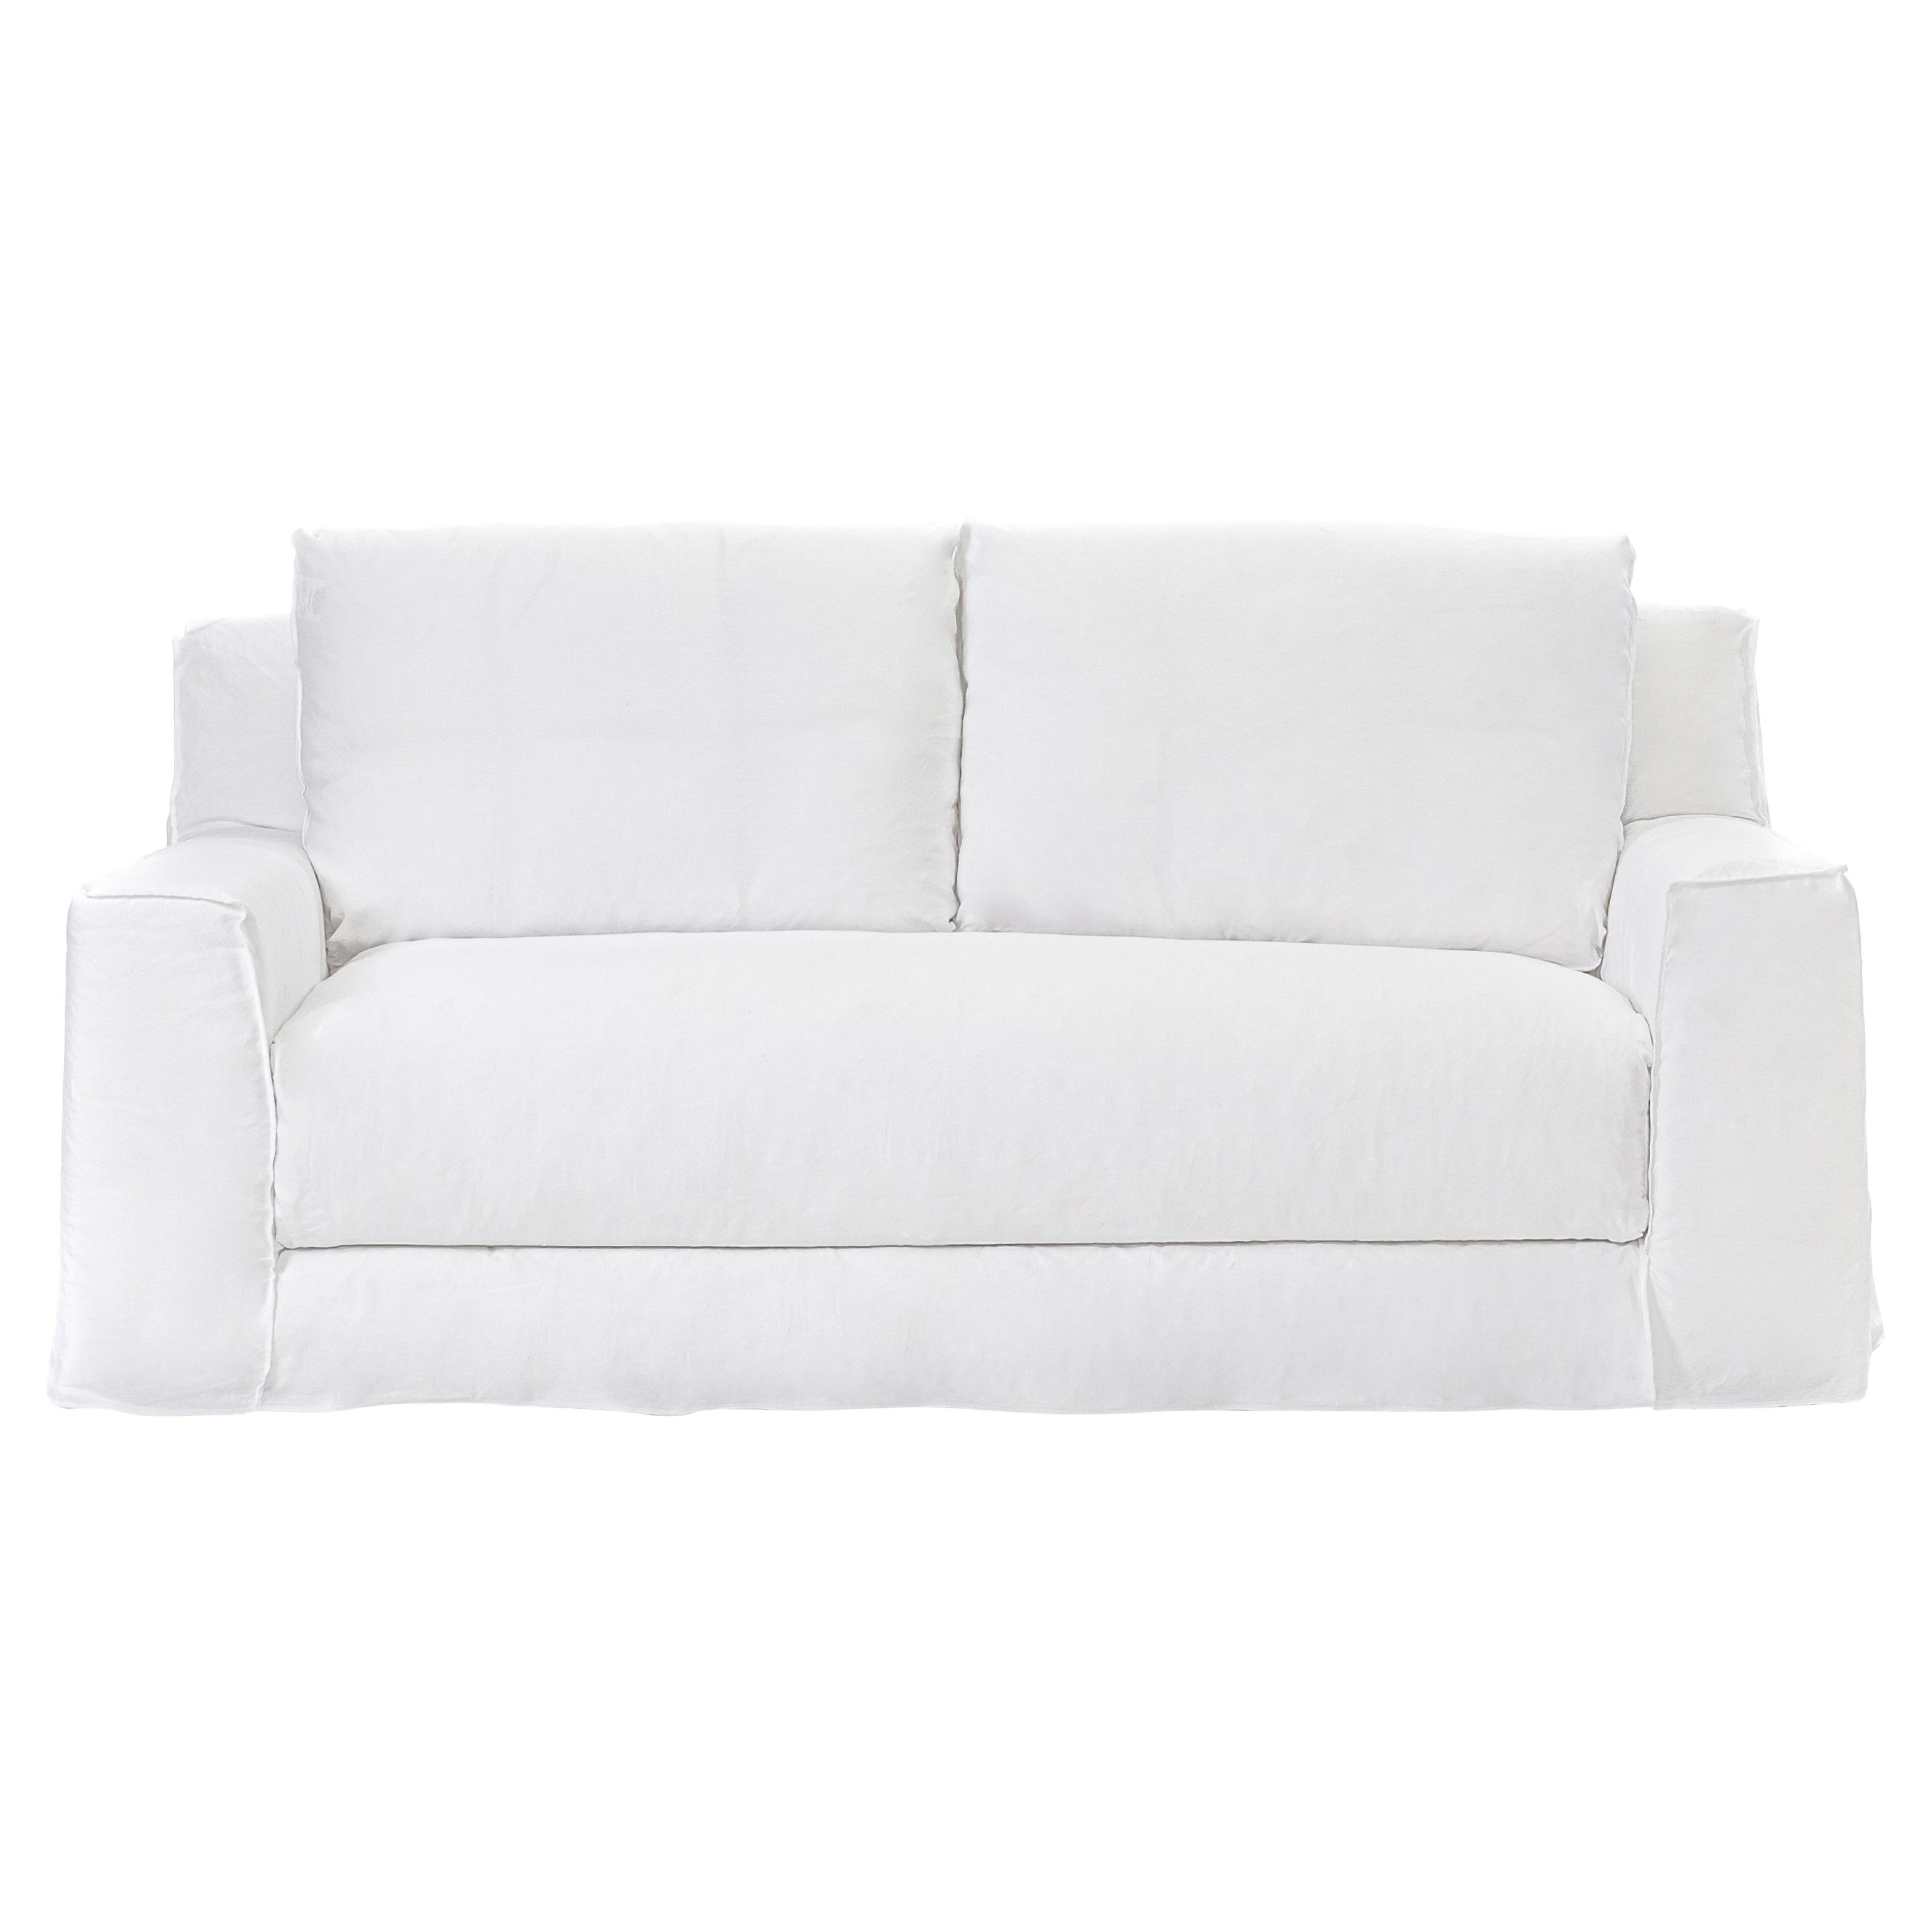 Gervasoni Loll 10 Sofa in White Linen Upholstery by Paola Navone For Sale